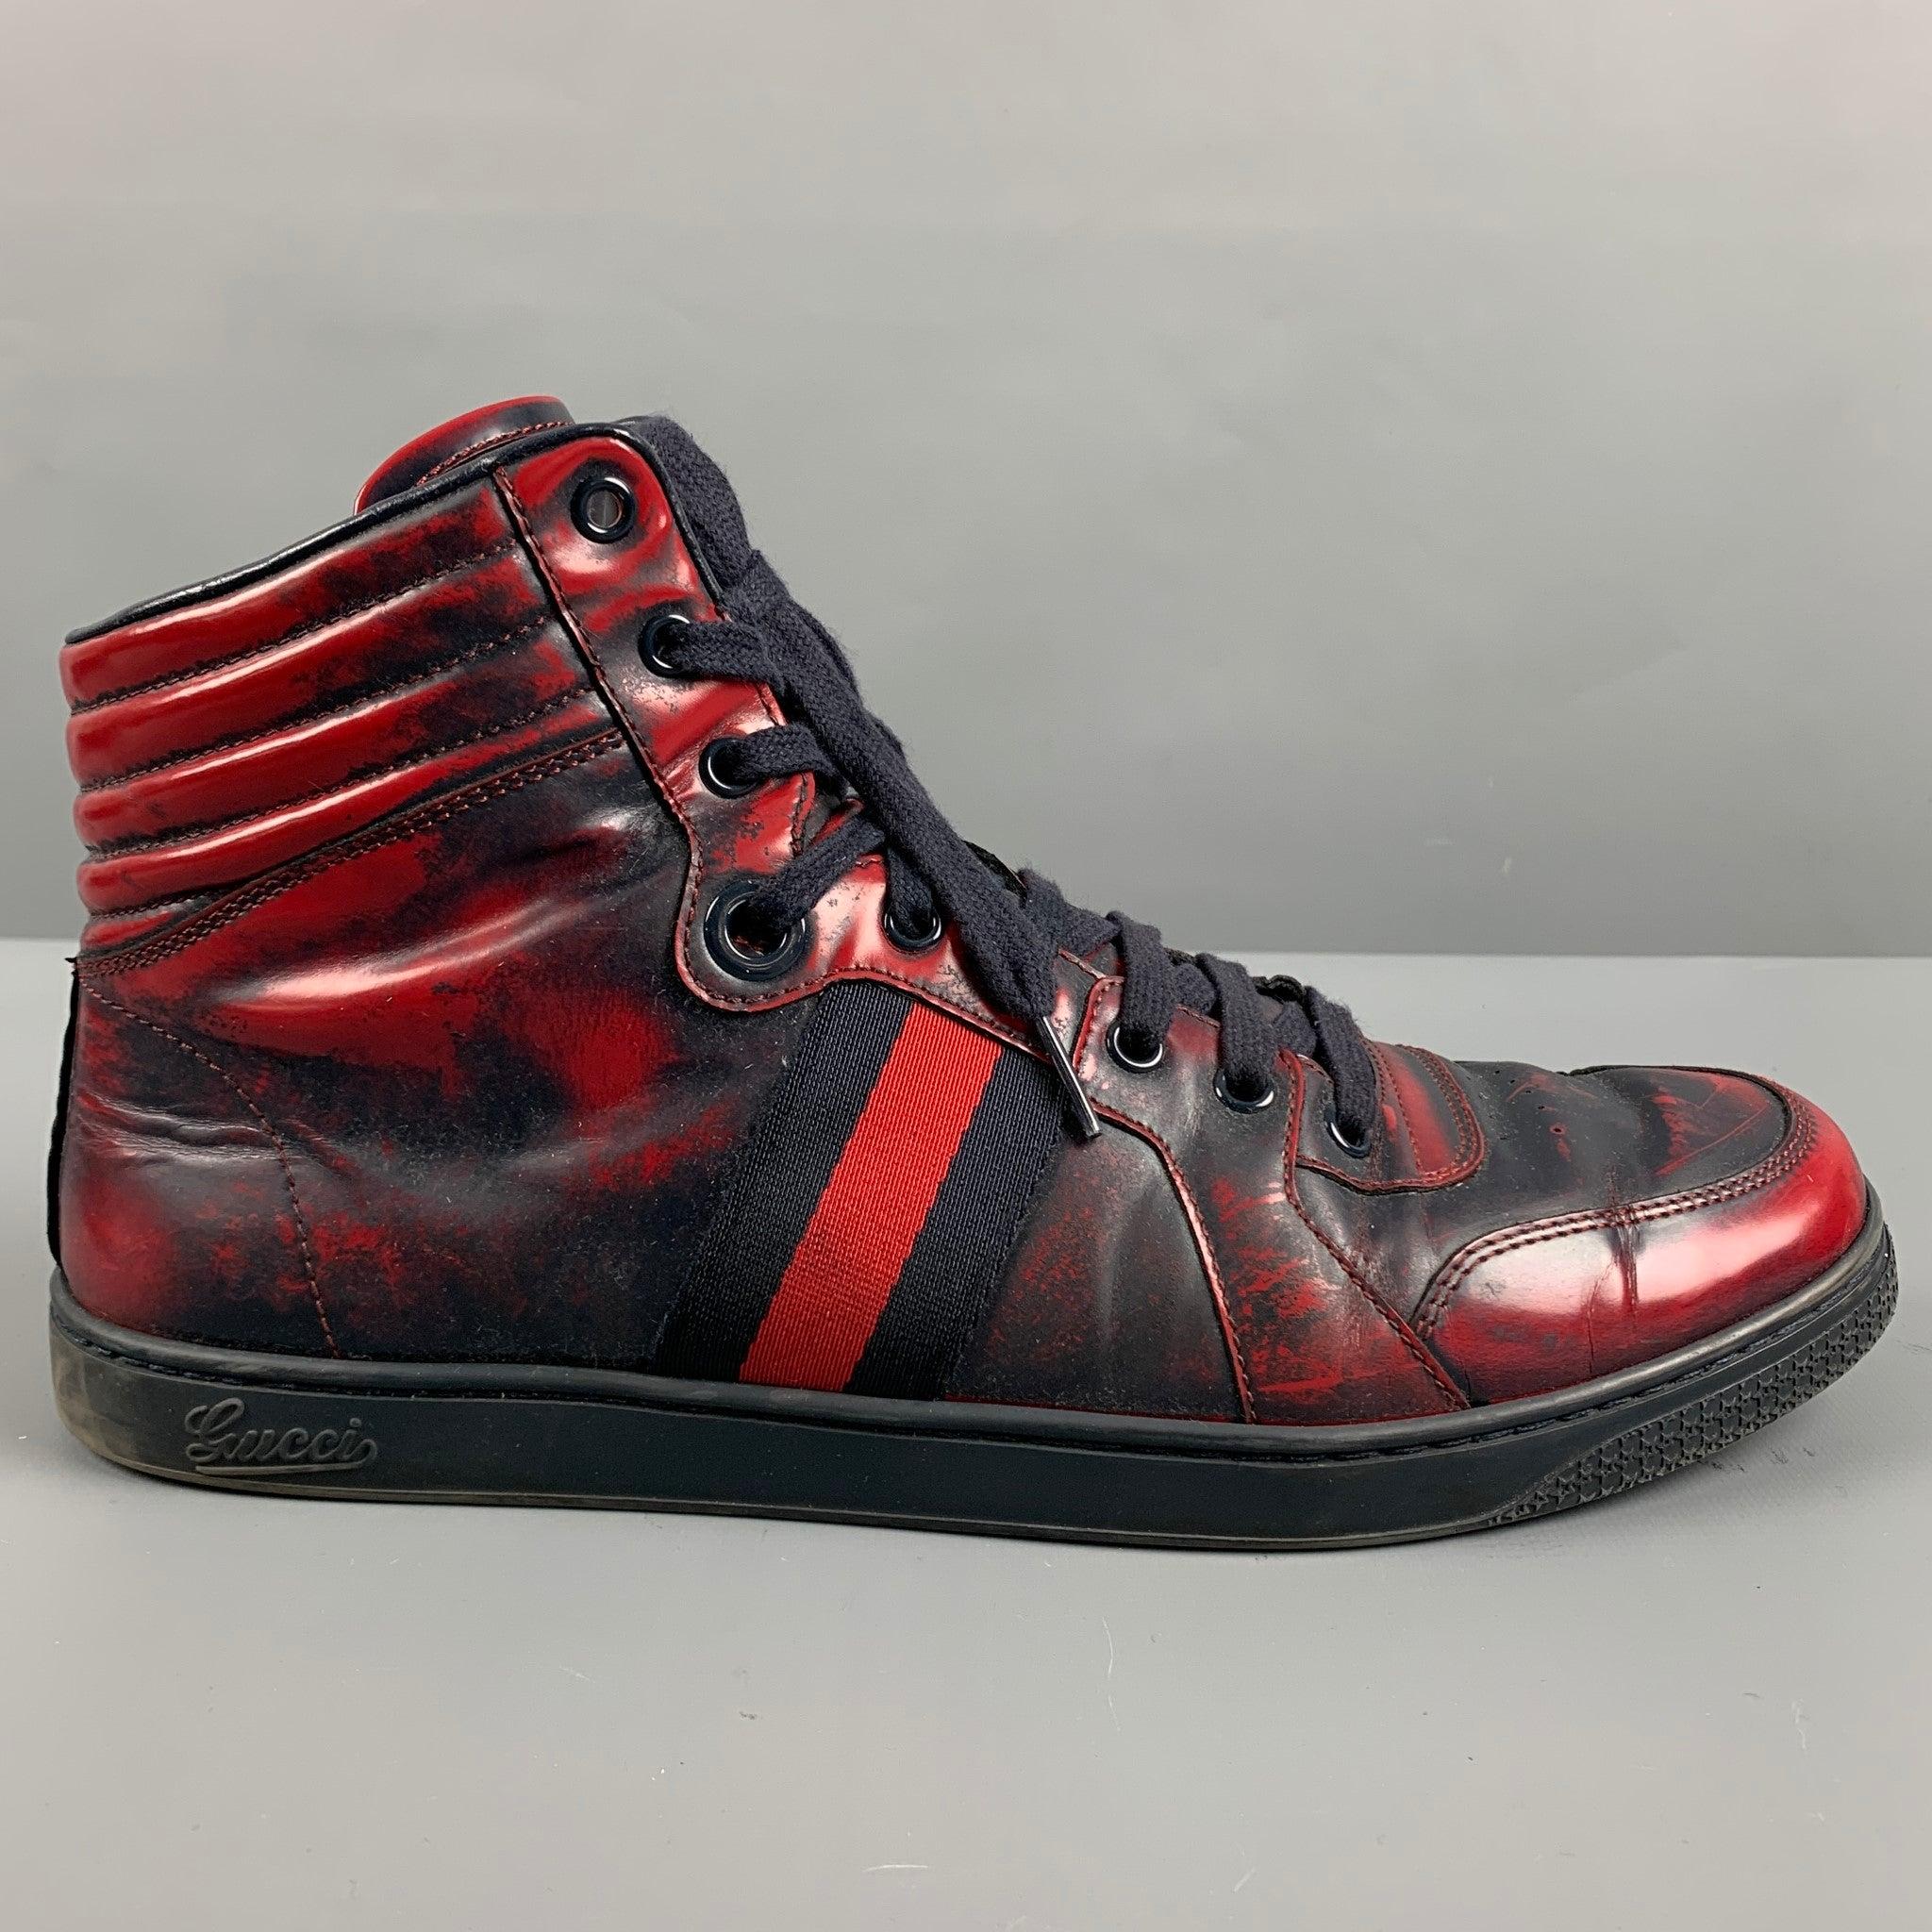 GUCCI sneakers
in a red and navy leather featuring a high top style, marbled pattern, signature Gucci stripes, and lace-up closure. Made in Italy.Very Good Pre-Owned Condition. Minor signs of wear. 

Marked:   283533 9 GOutsole: 11.5 inches  x 4 in
